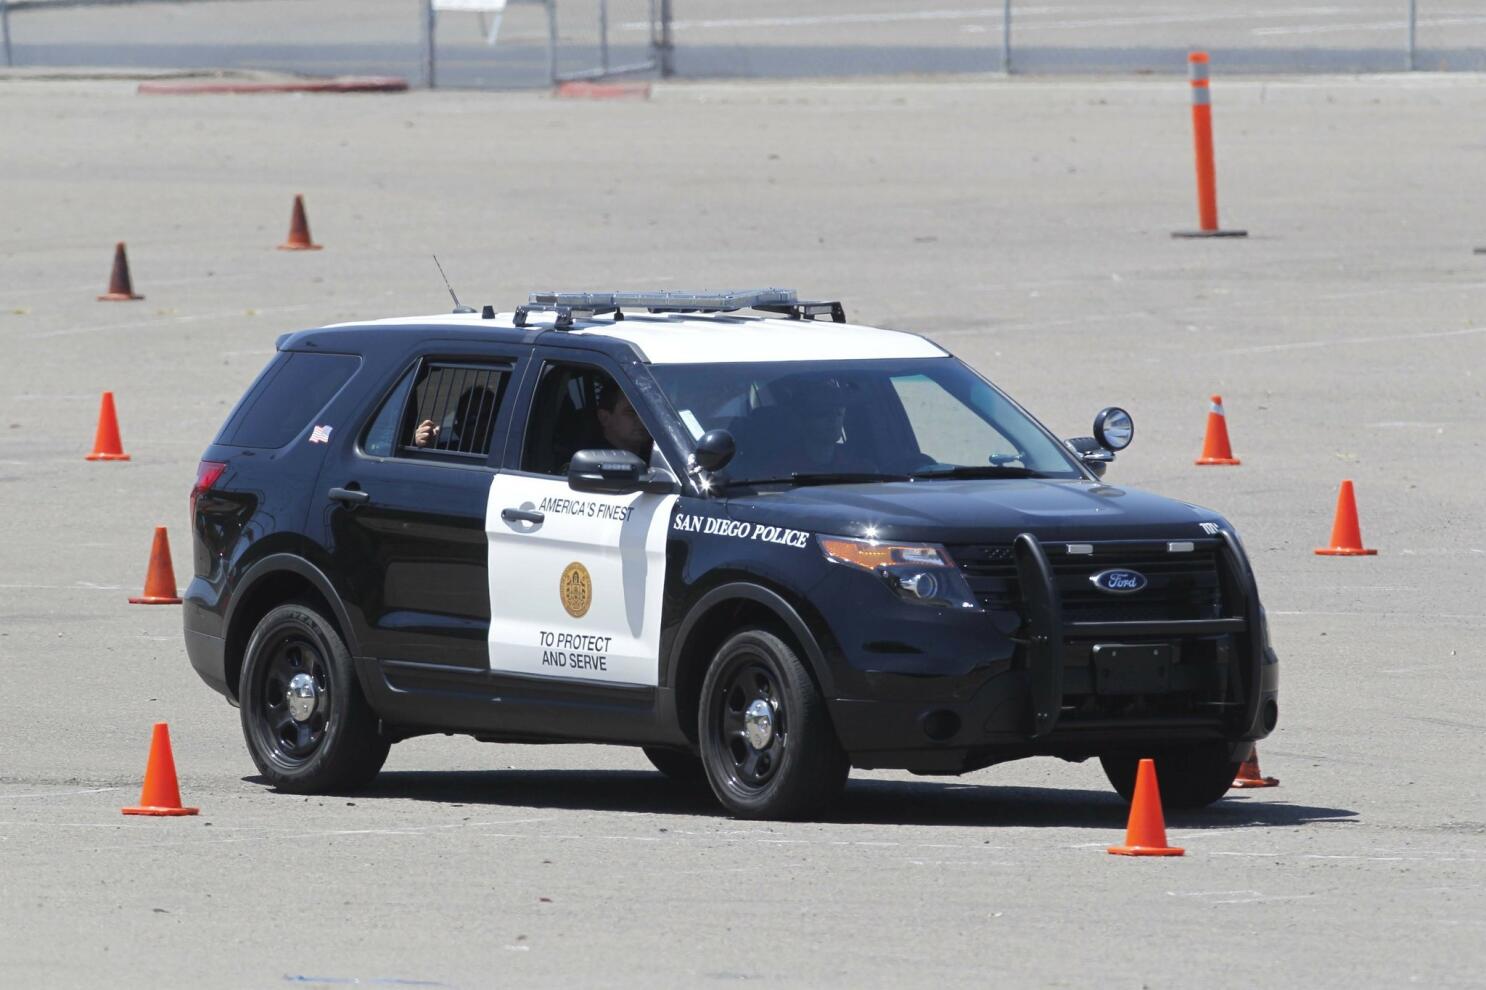 Ford Police Vehicles, Police-Tested & Street-Proven